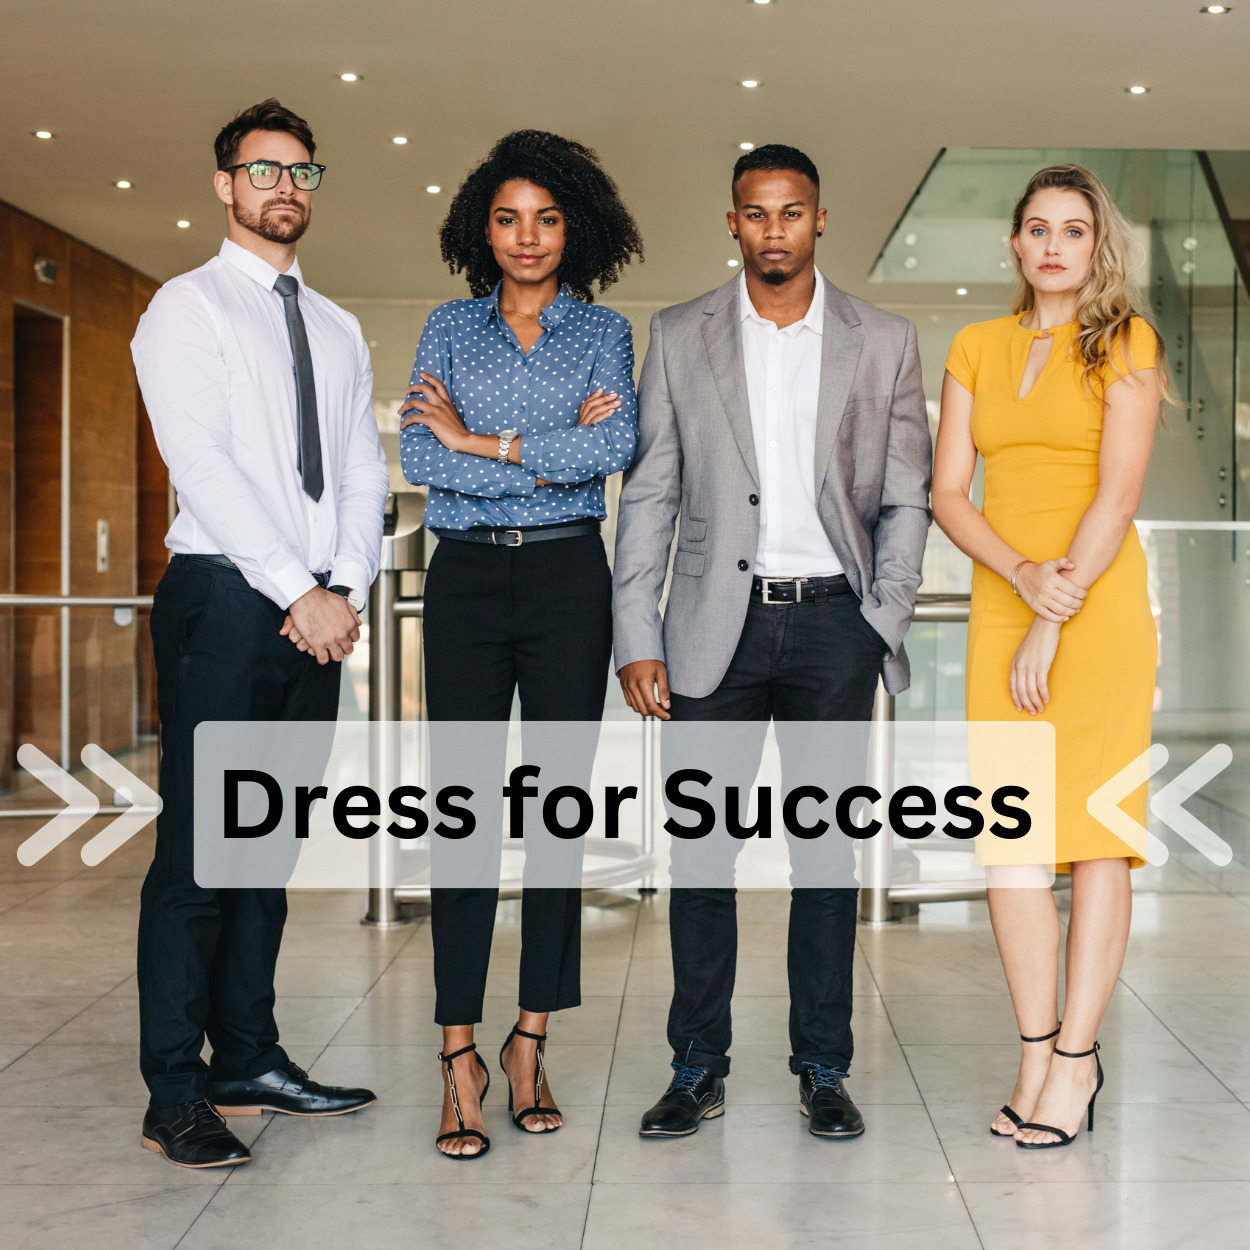 Dress for Success - Employment Connection - County of Santa Clara